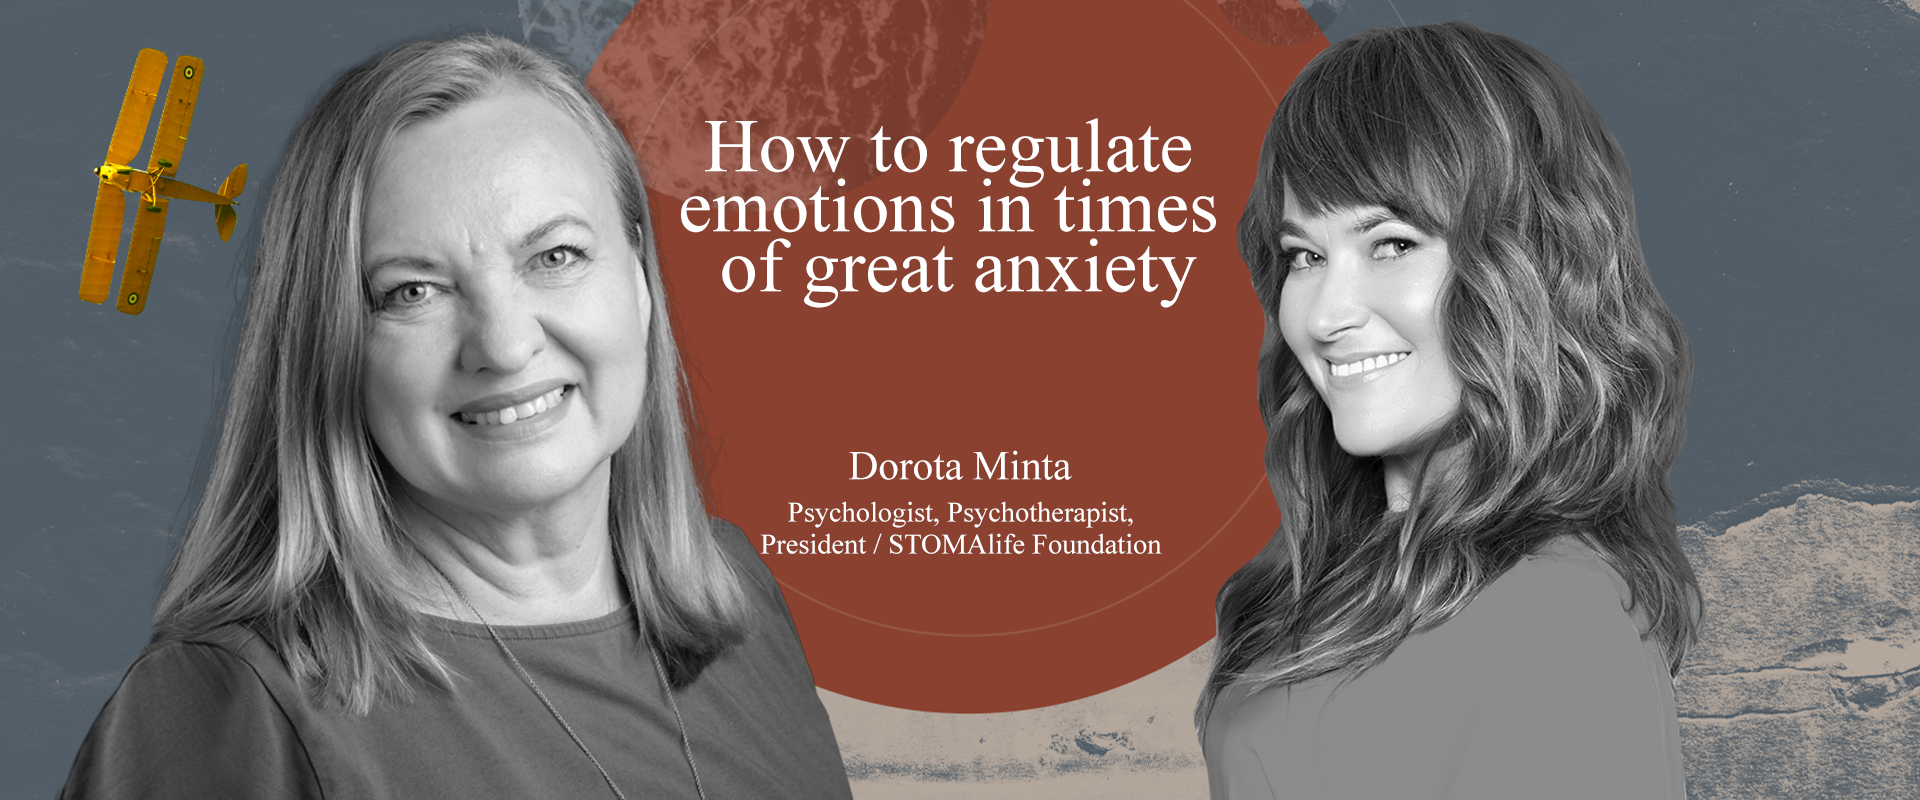 How to regulate emotions in times of great anxiety?